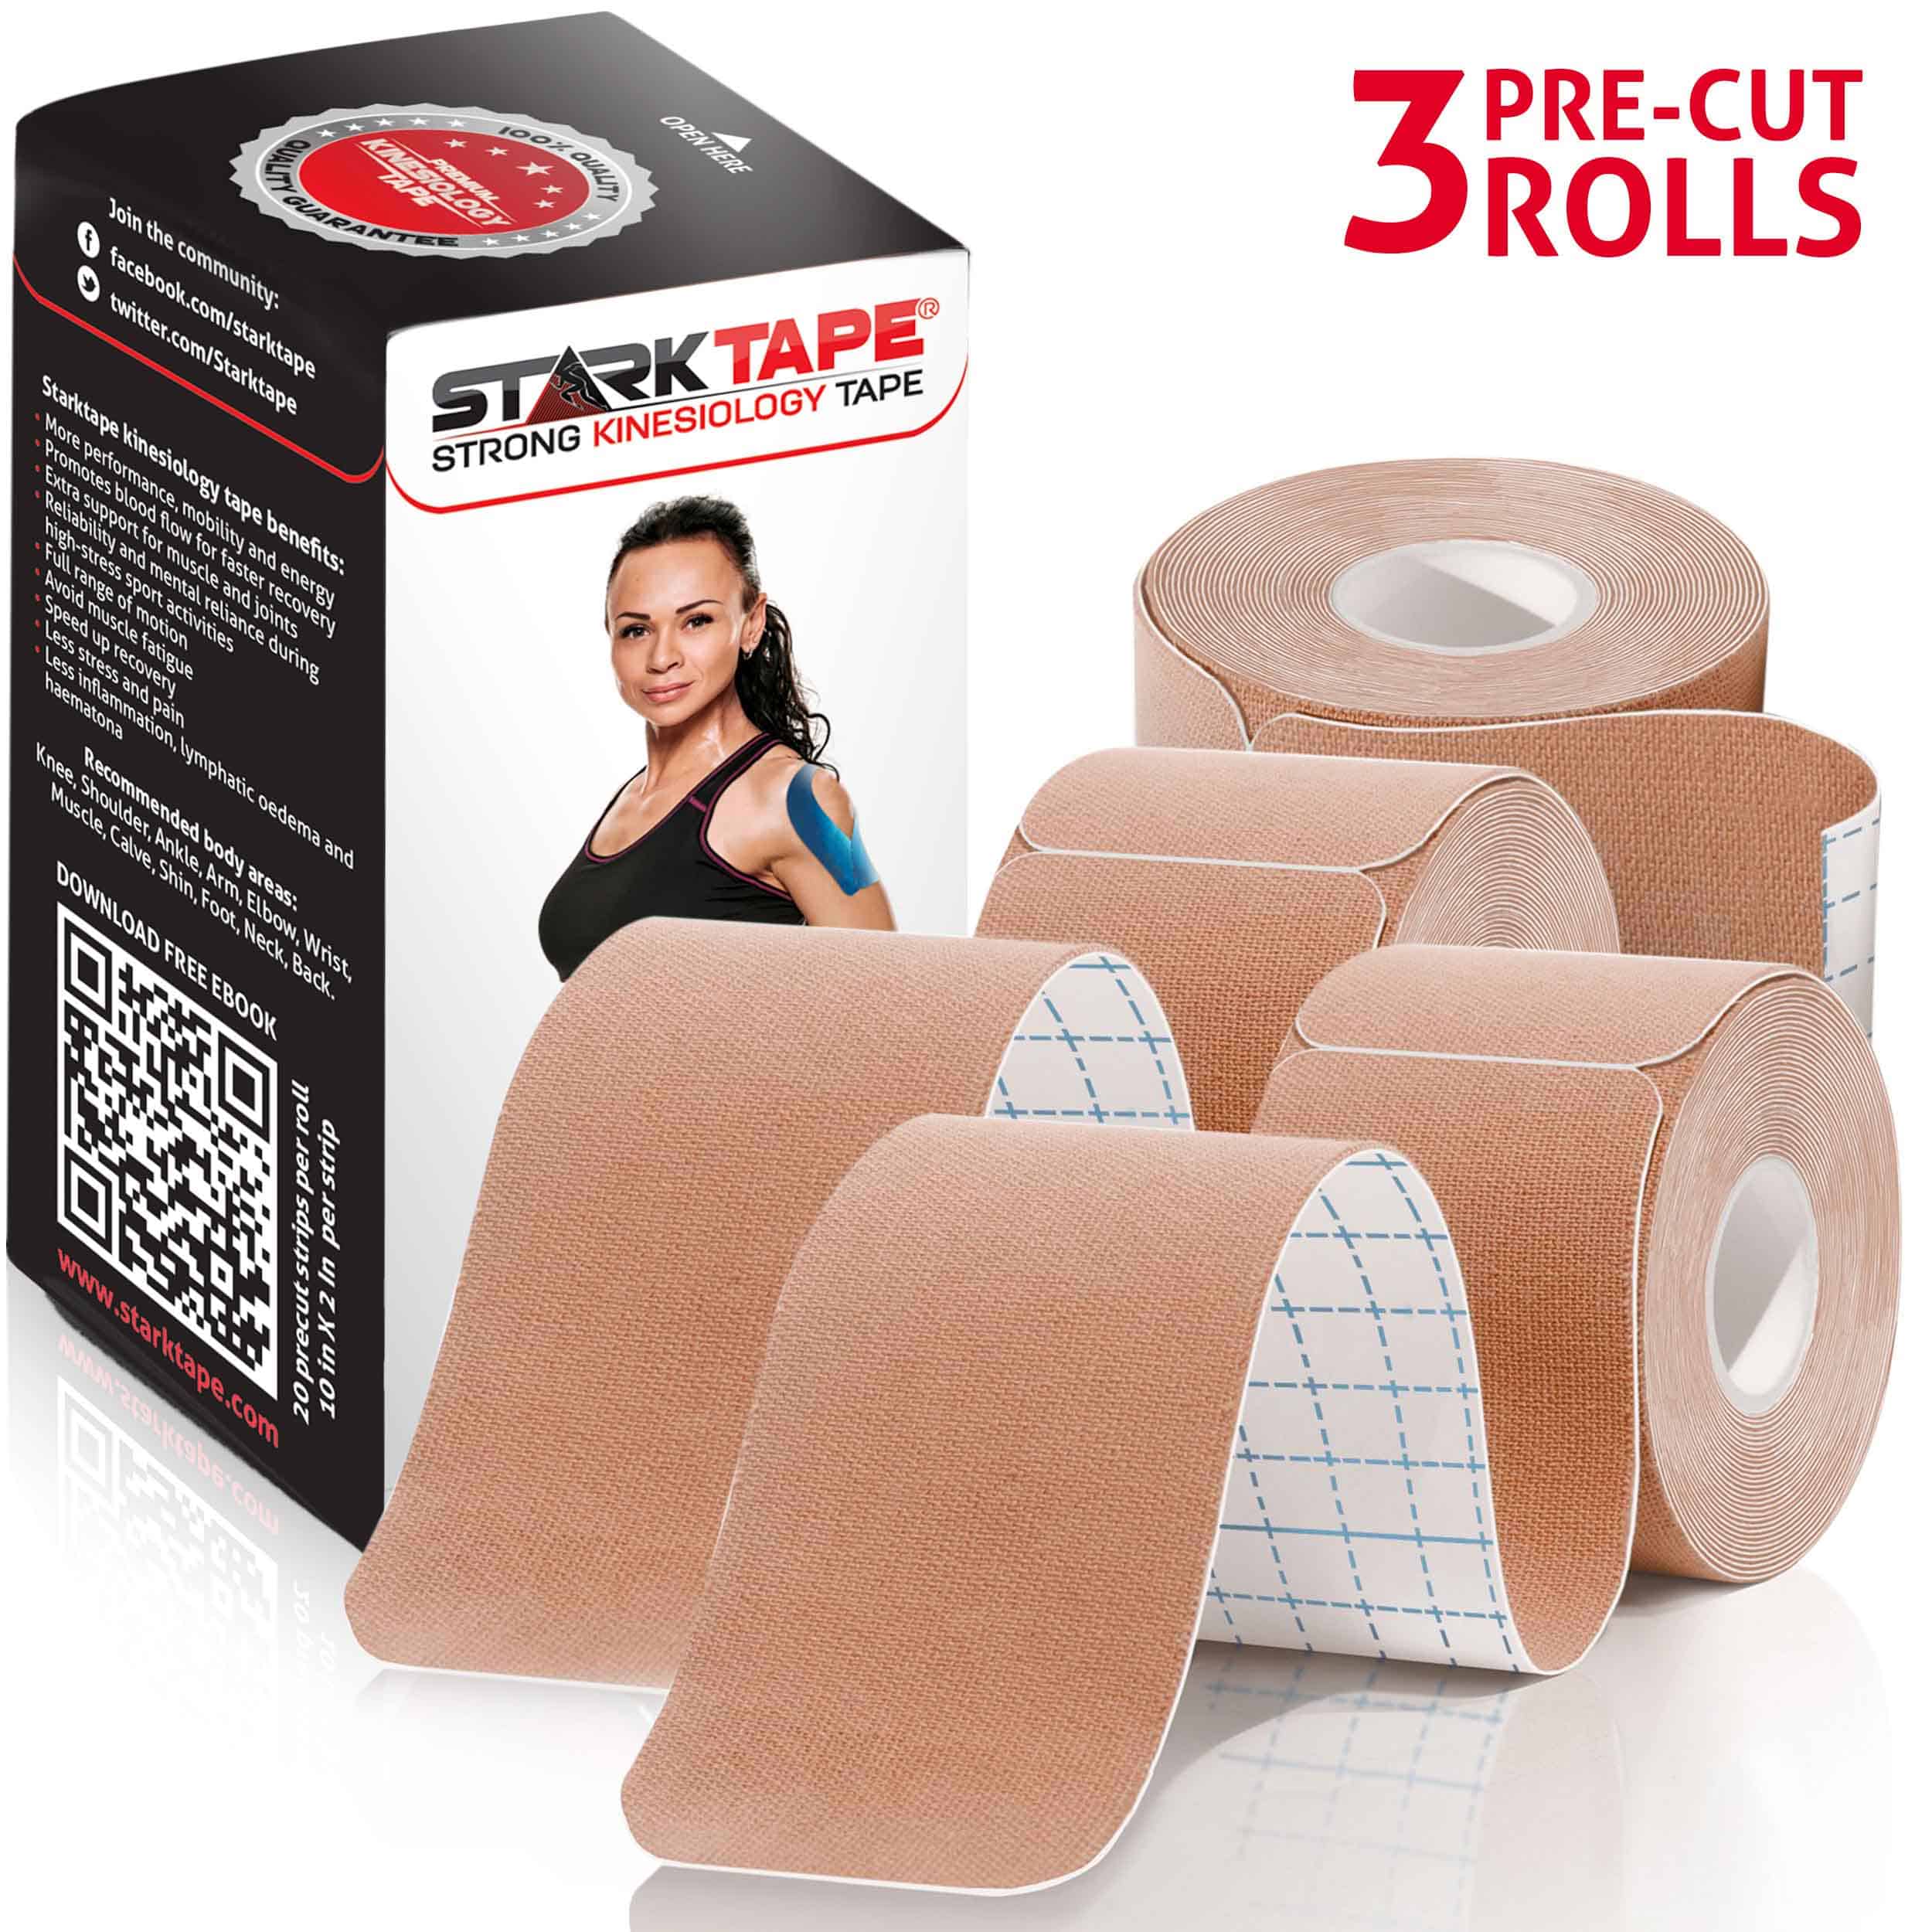 3 Rolls Kinesiology Tape Sports Physio Muscle Strain Injury Support KT Ares 